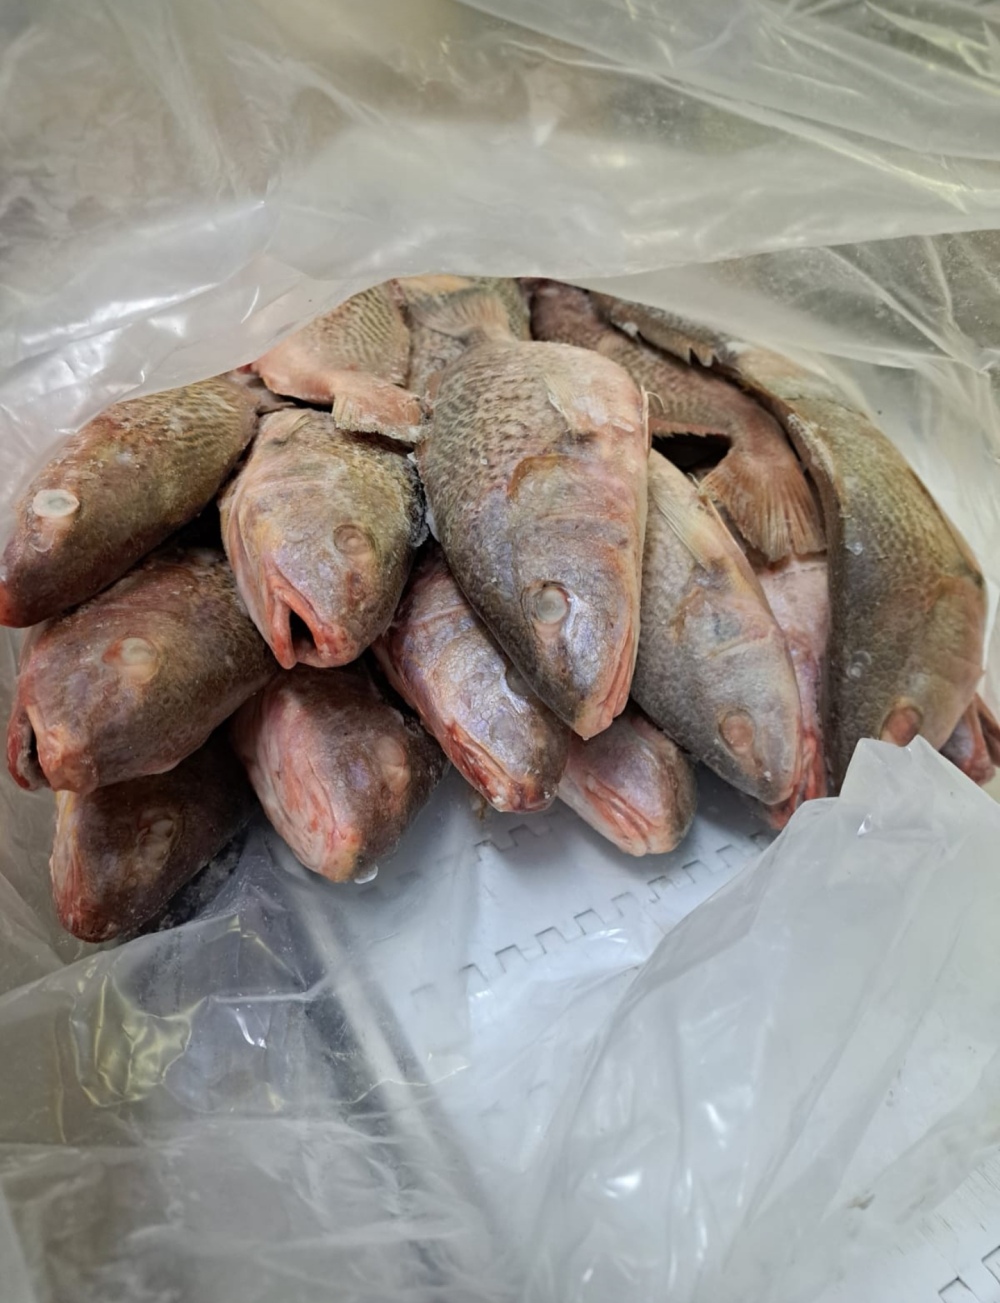 IMPORTER AND EXPORTER OF FROZEN FISH